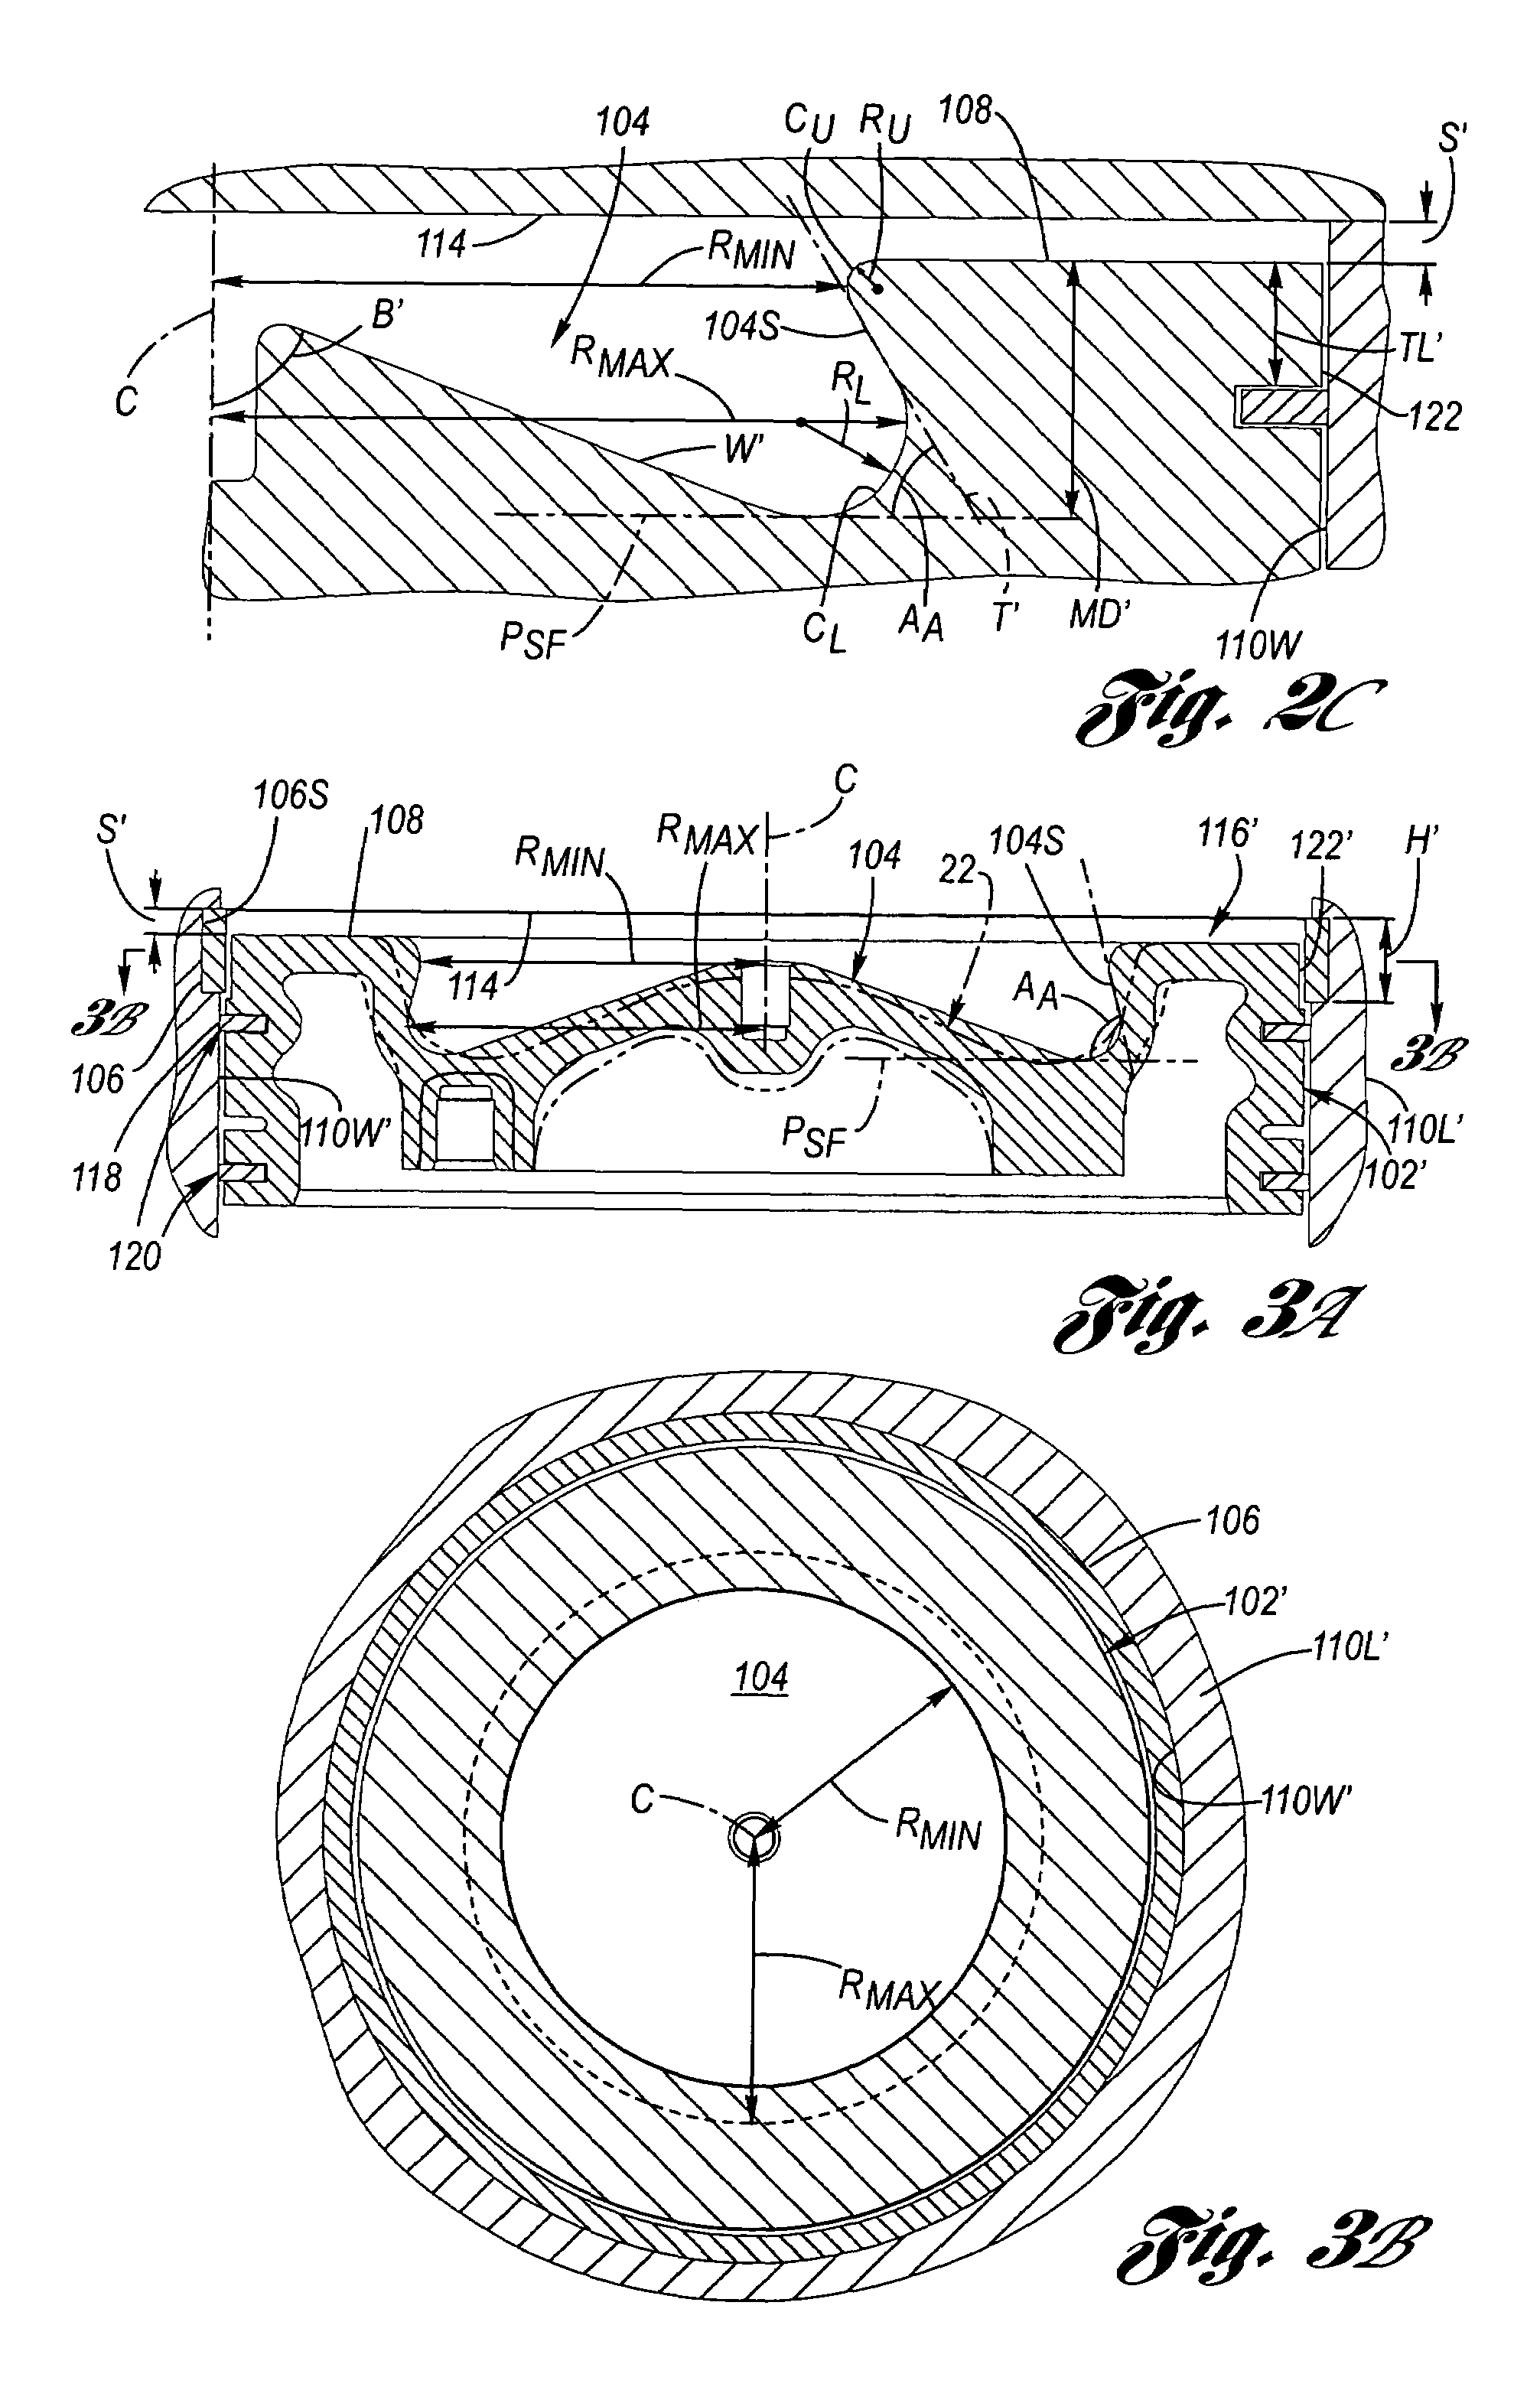 Large-bore, medium-speed diesel engine having piston crown bowl with acute re-entrant angle